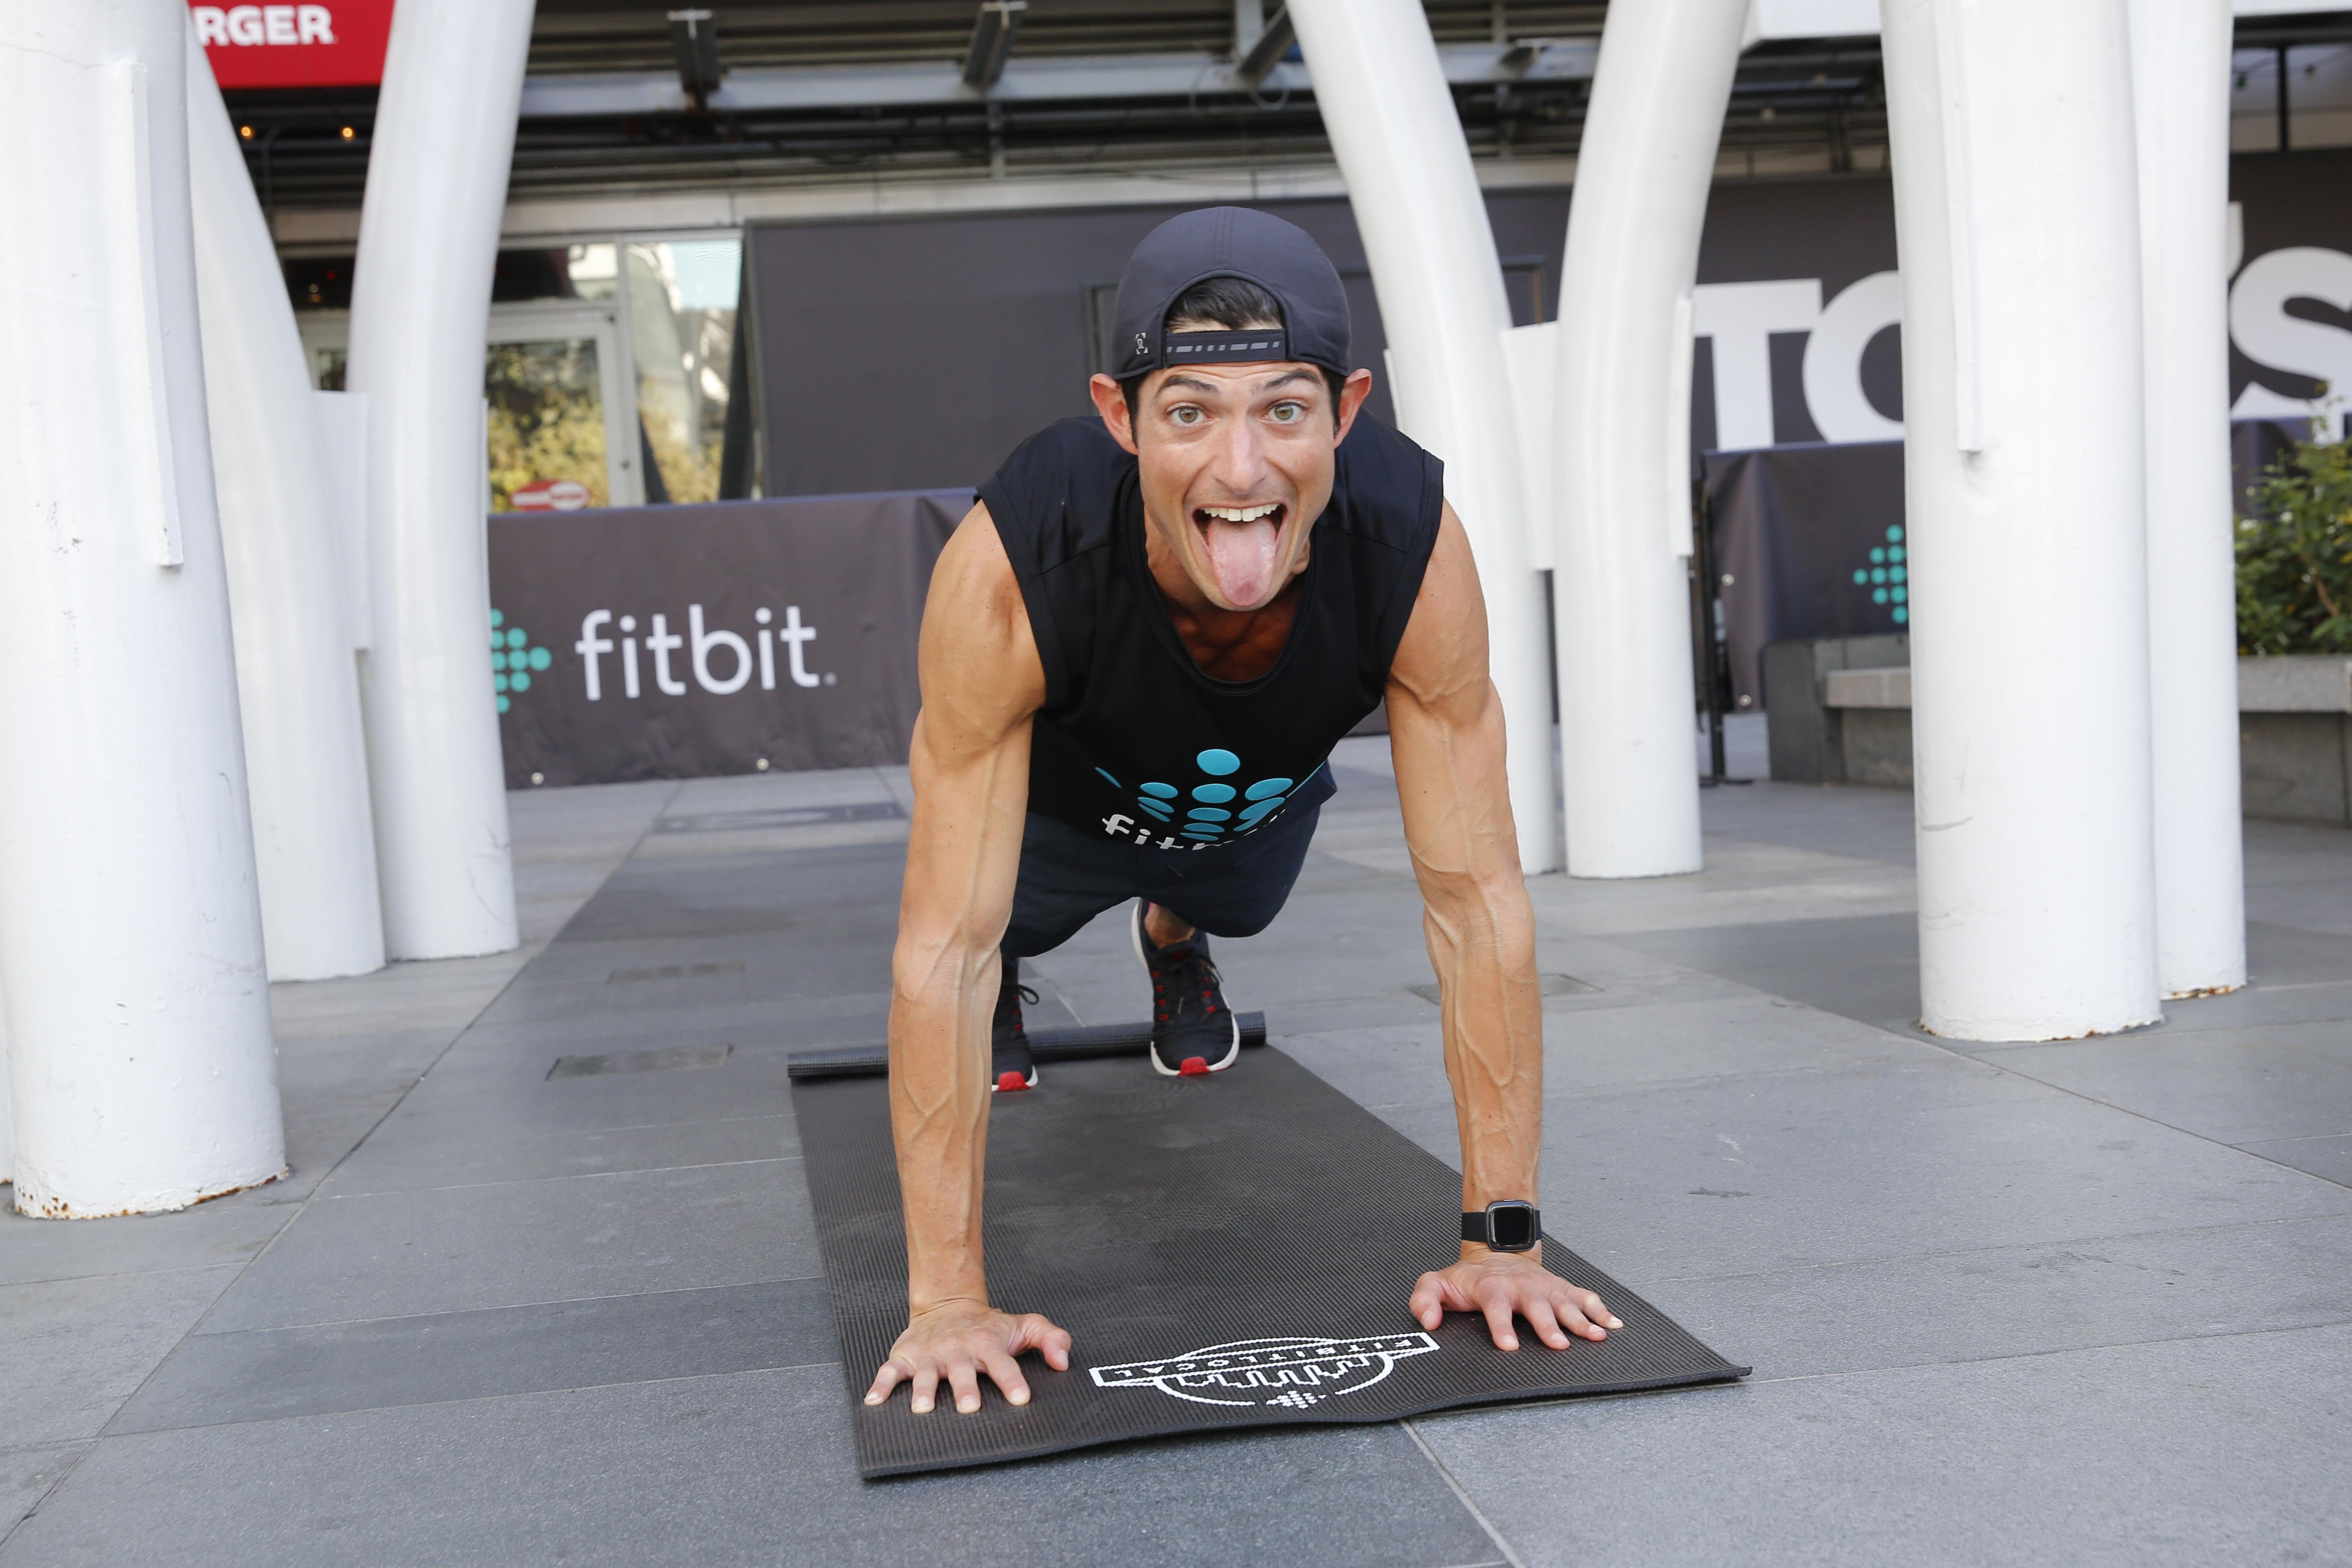 A man sticks his tongue out while doing a plank.